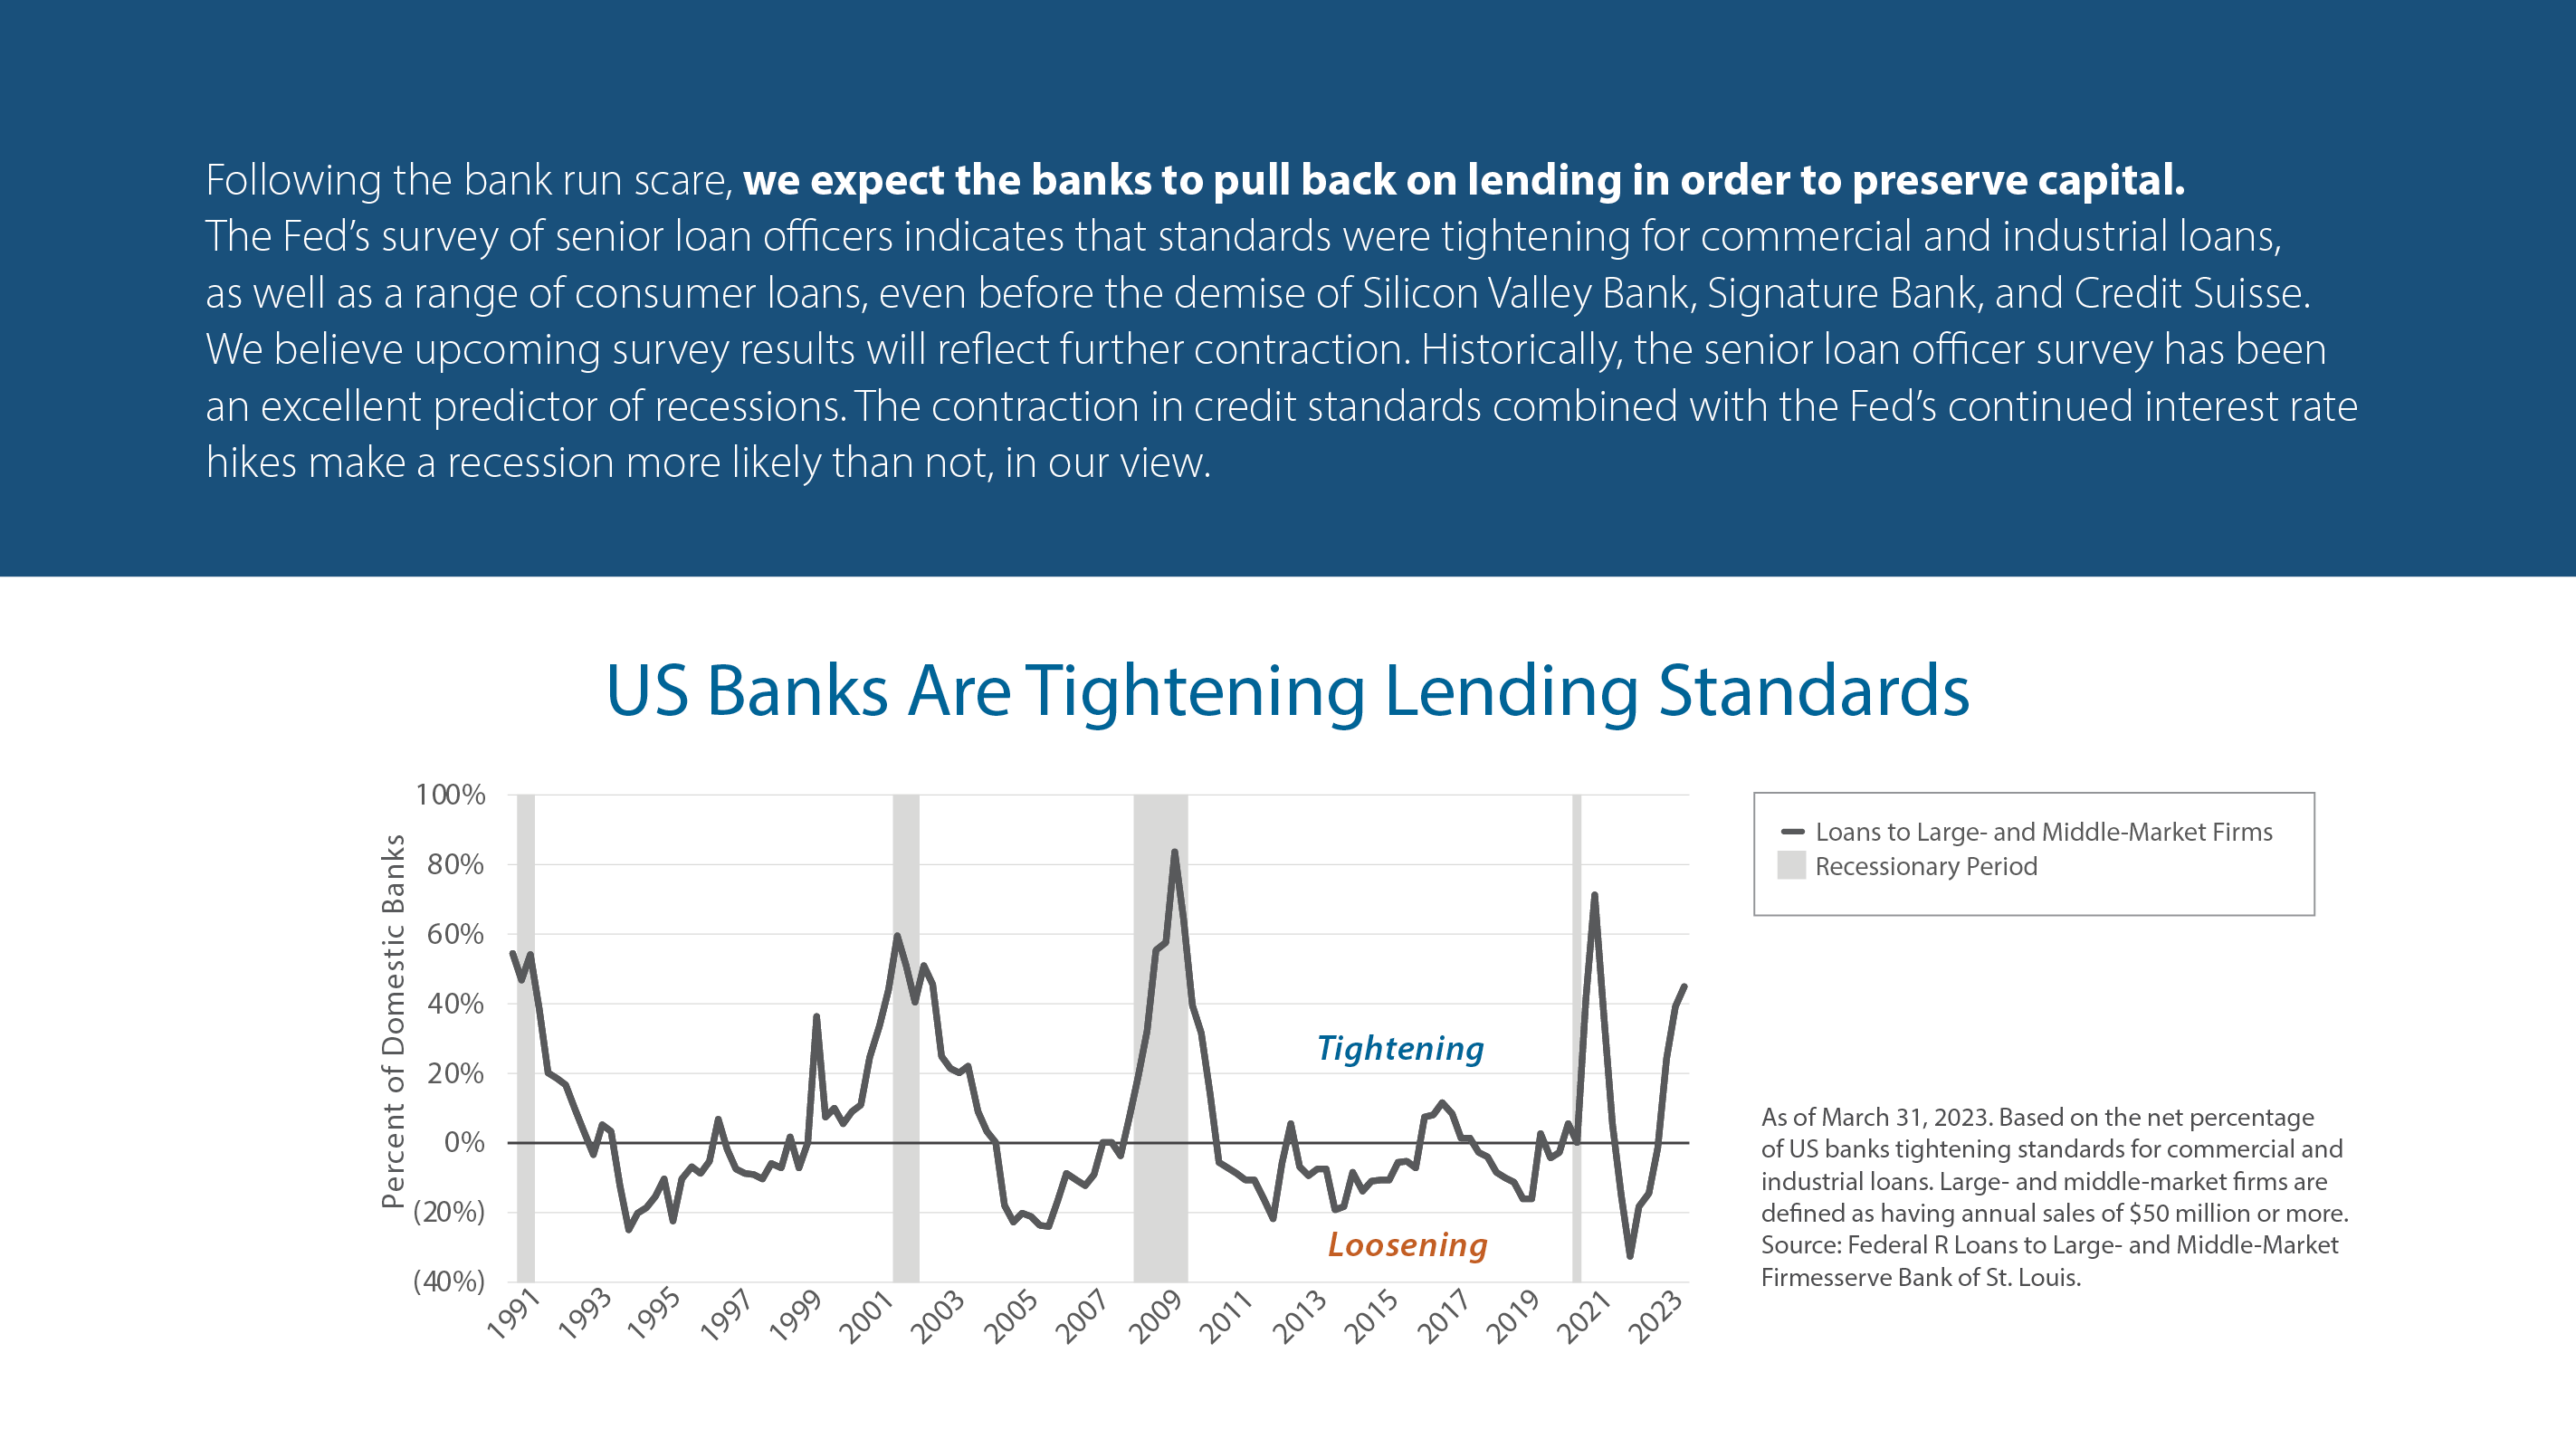 US Banks Are Tightening Lending Standards